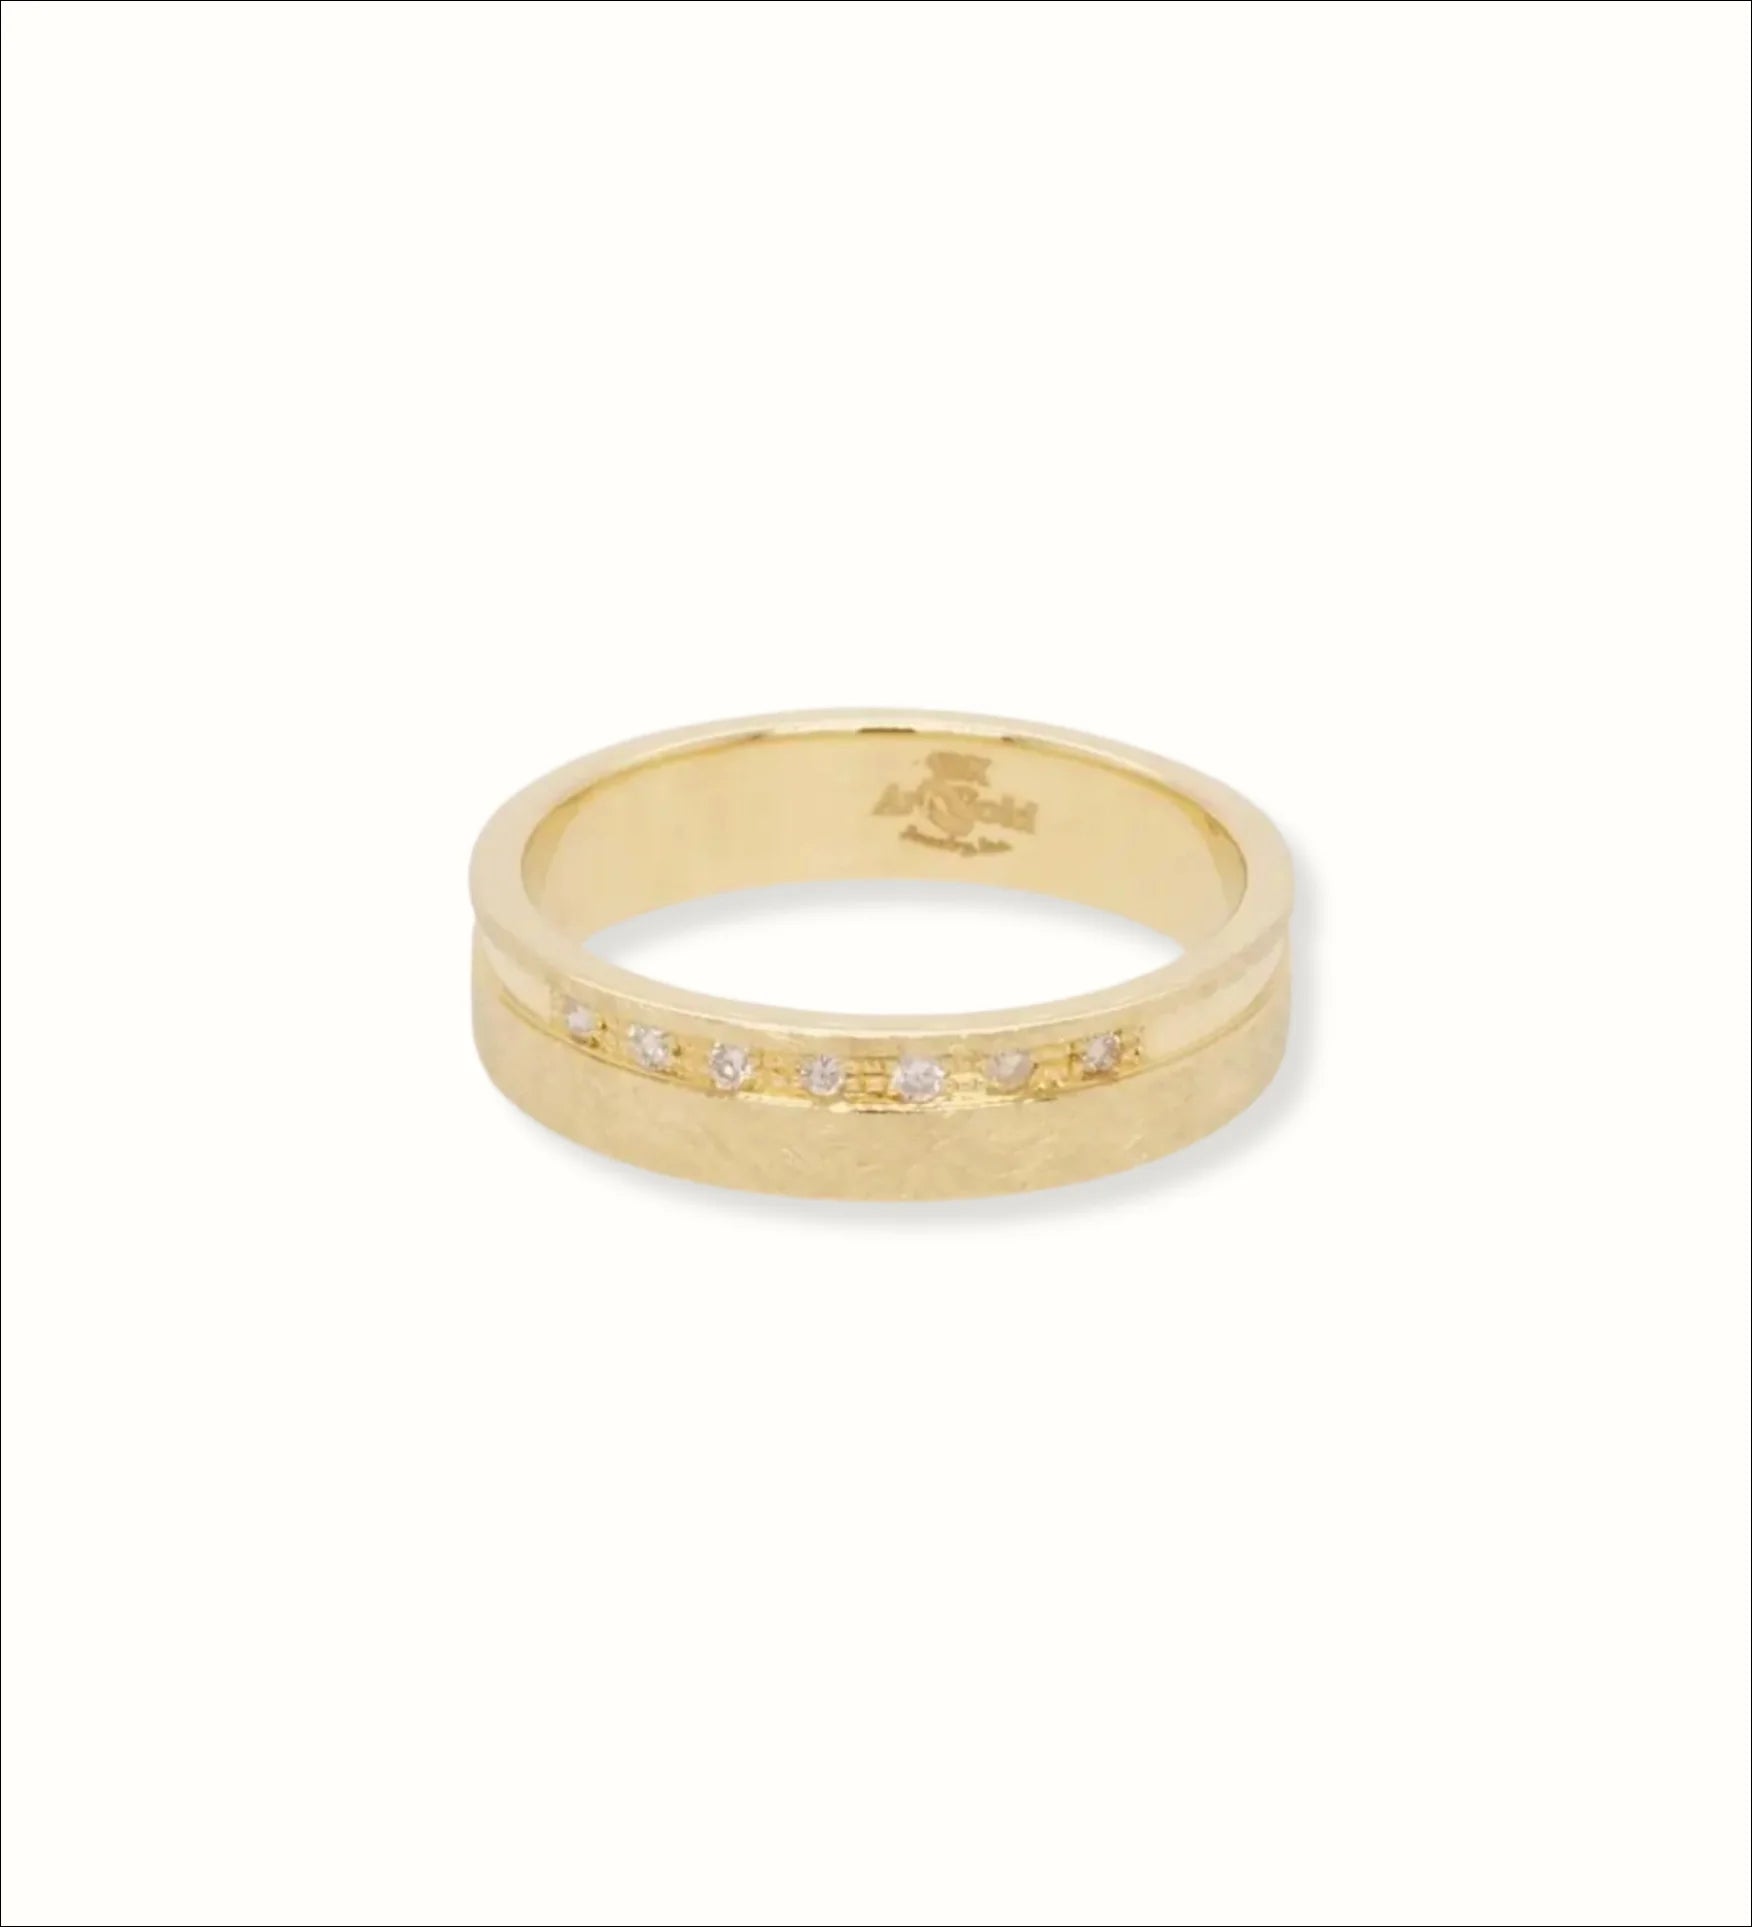 Elegant 18k Gold Diamond Wedding Band for Her | Home page